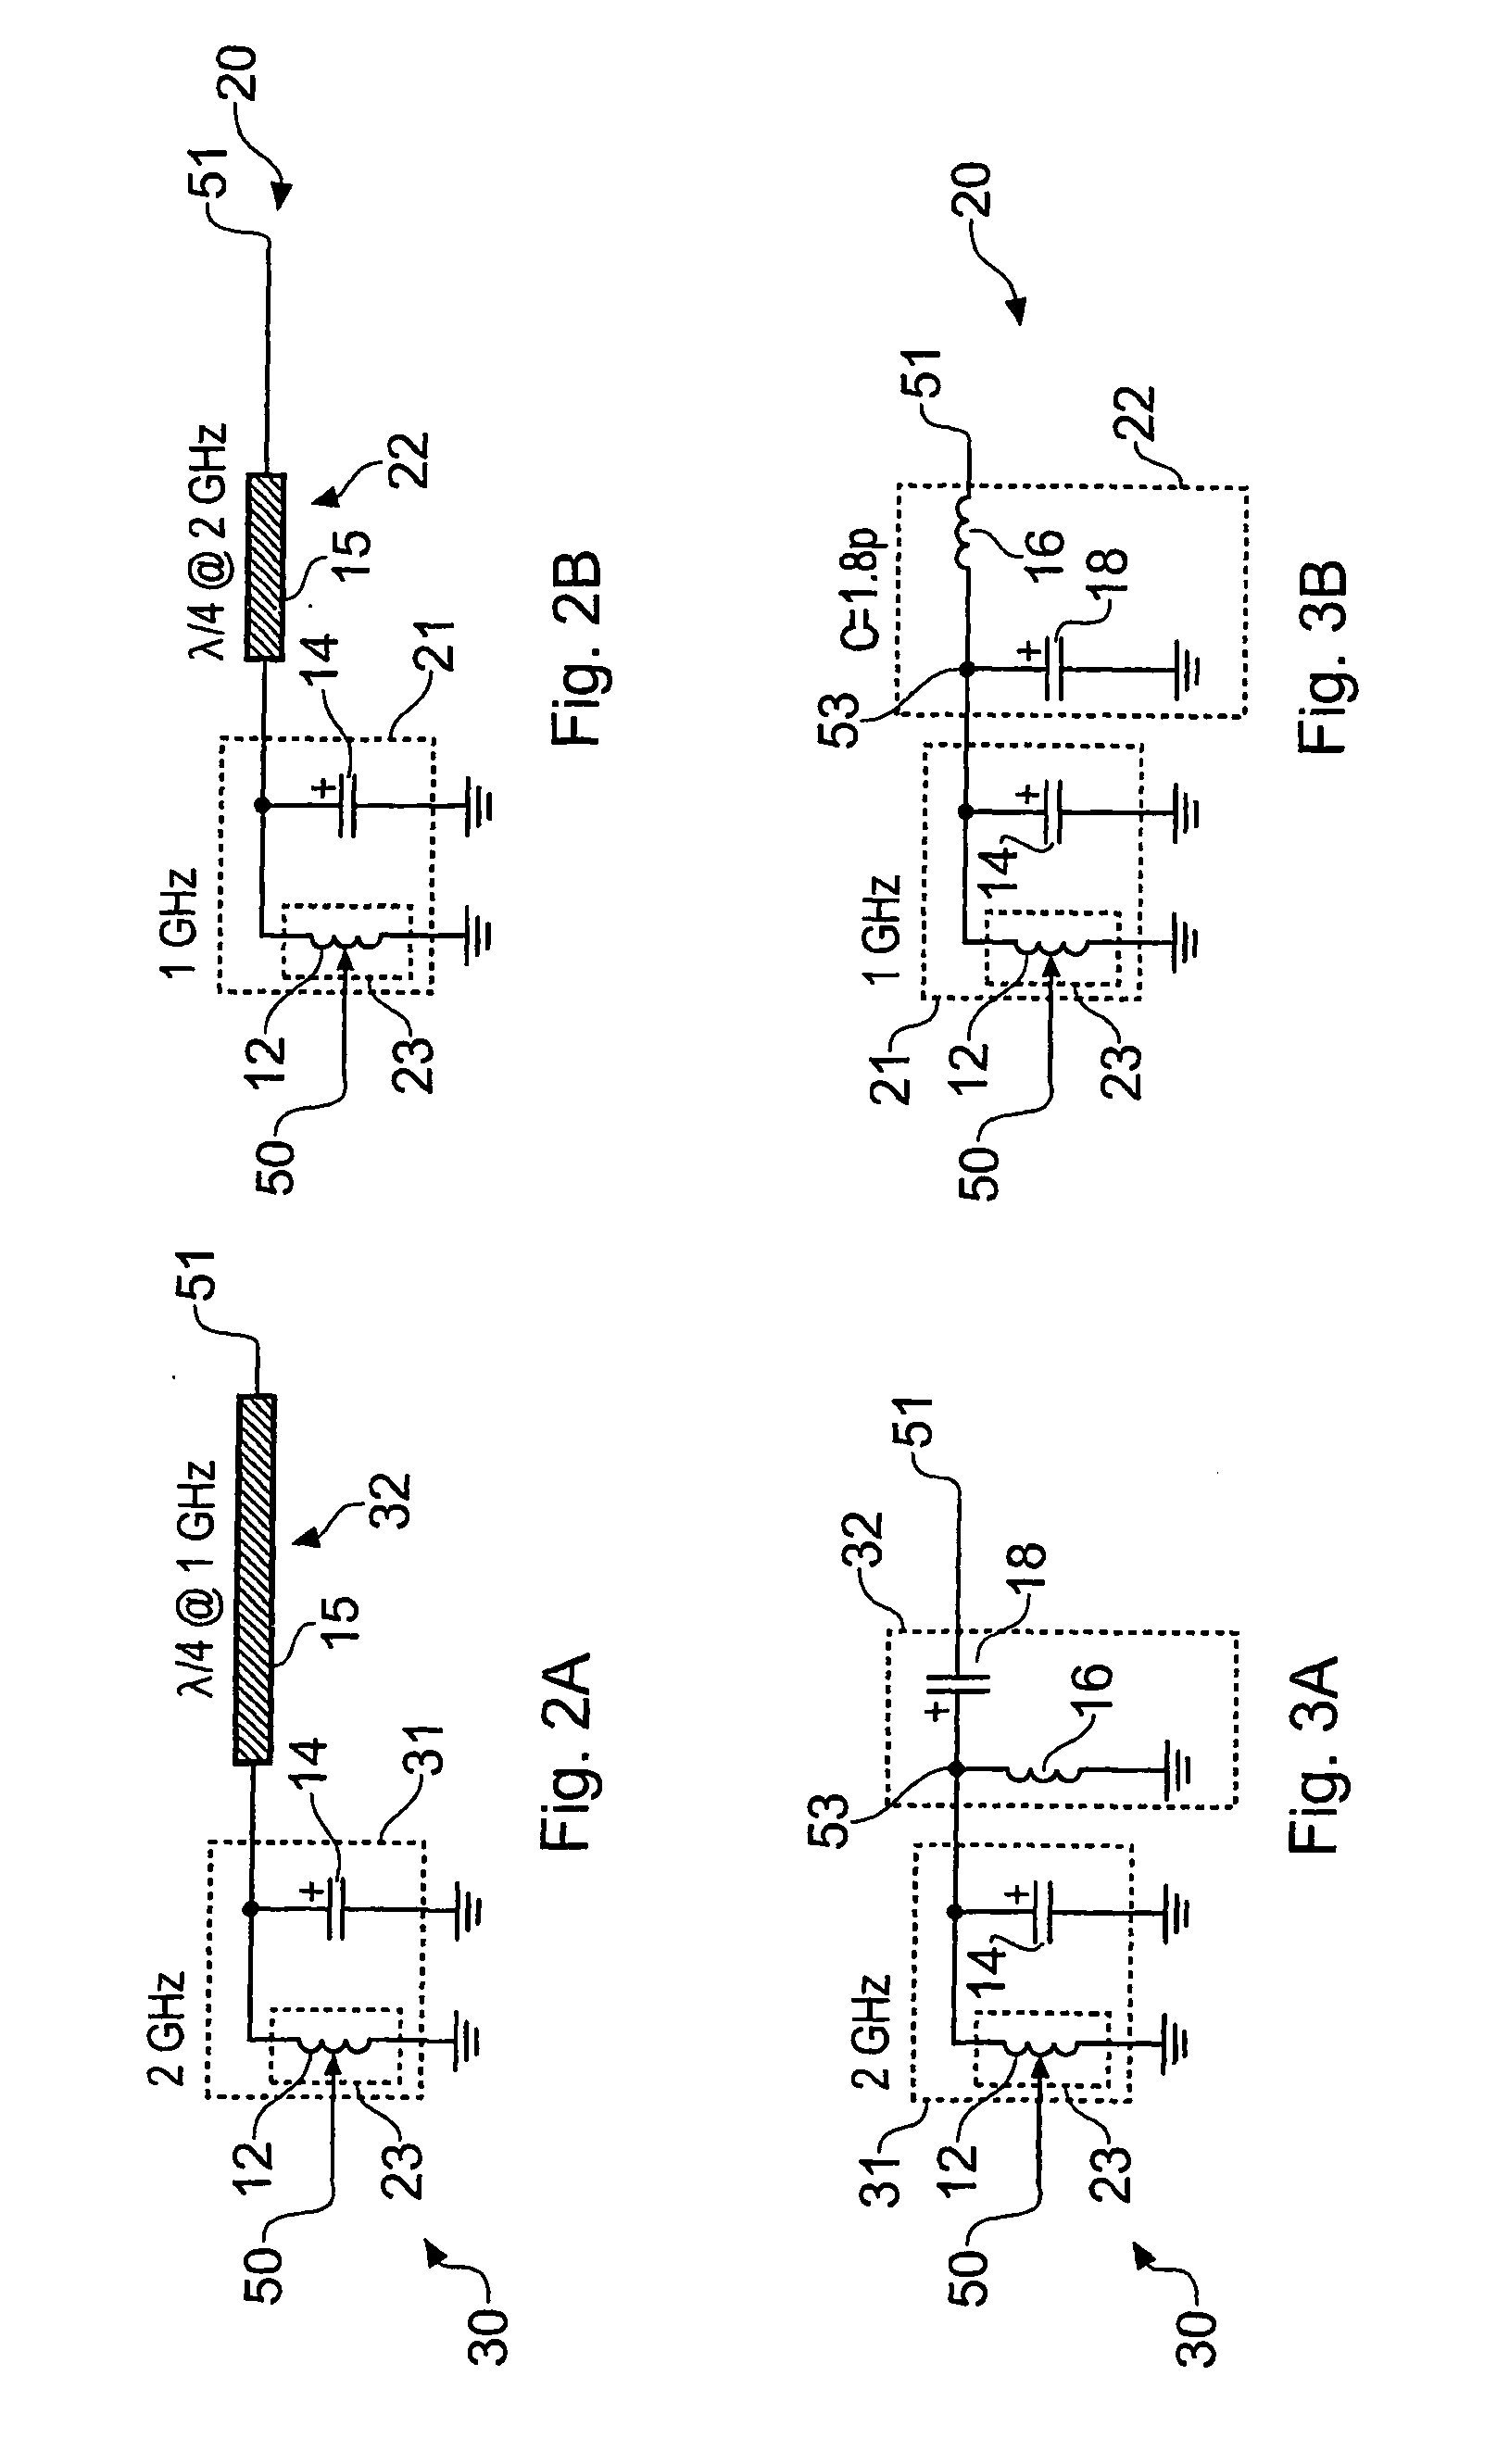 Apparatus for enabling two elements to share a common feed